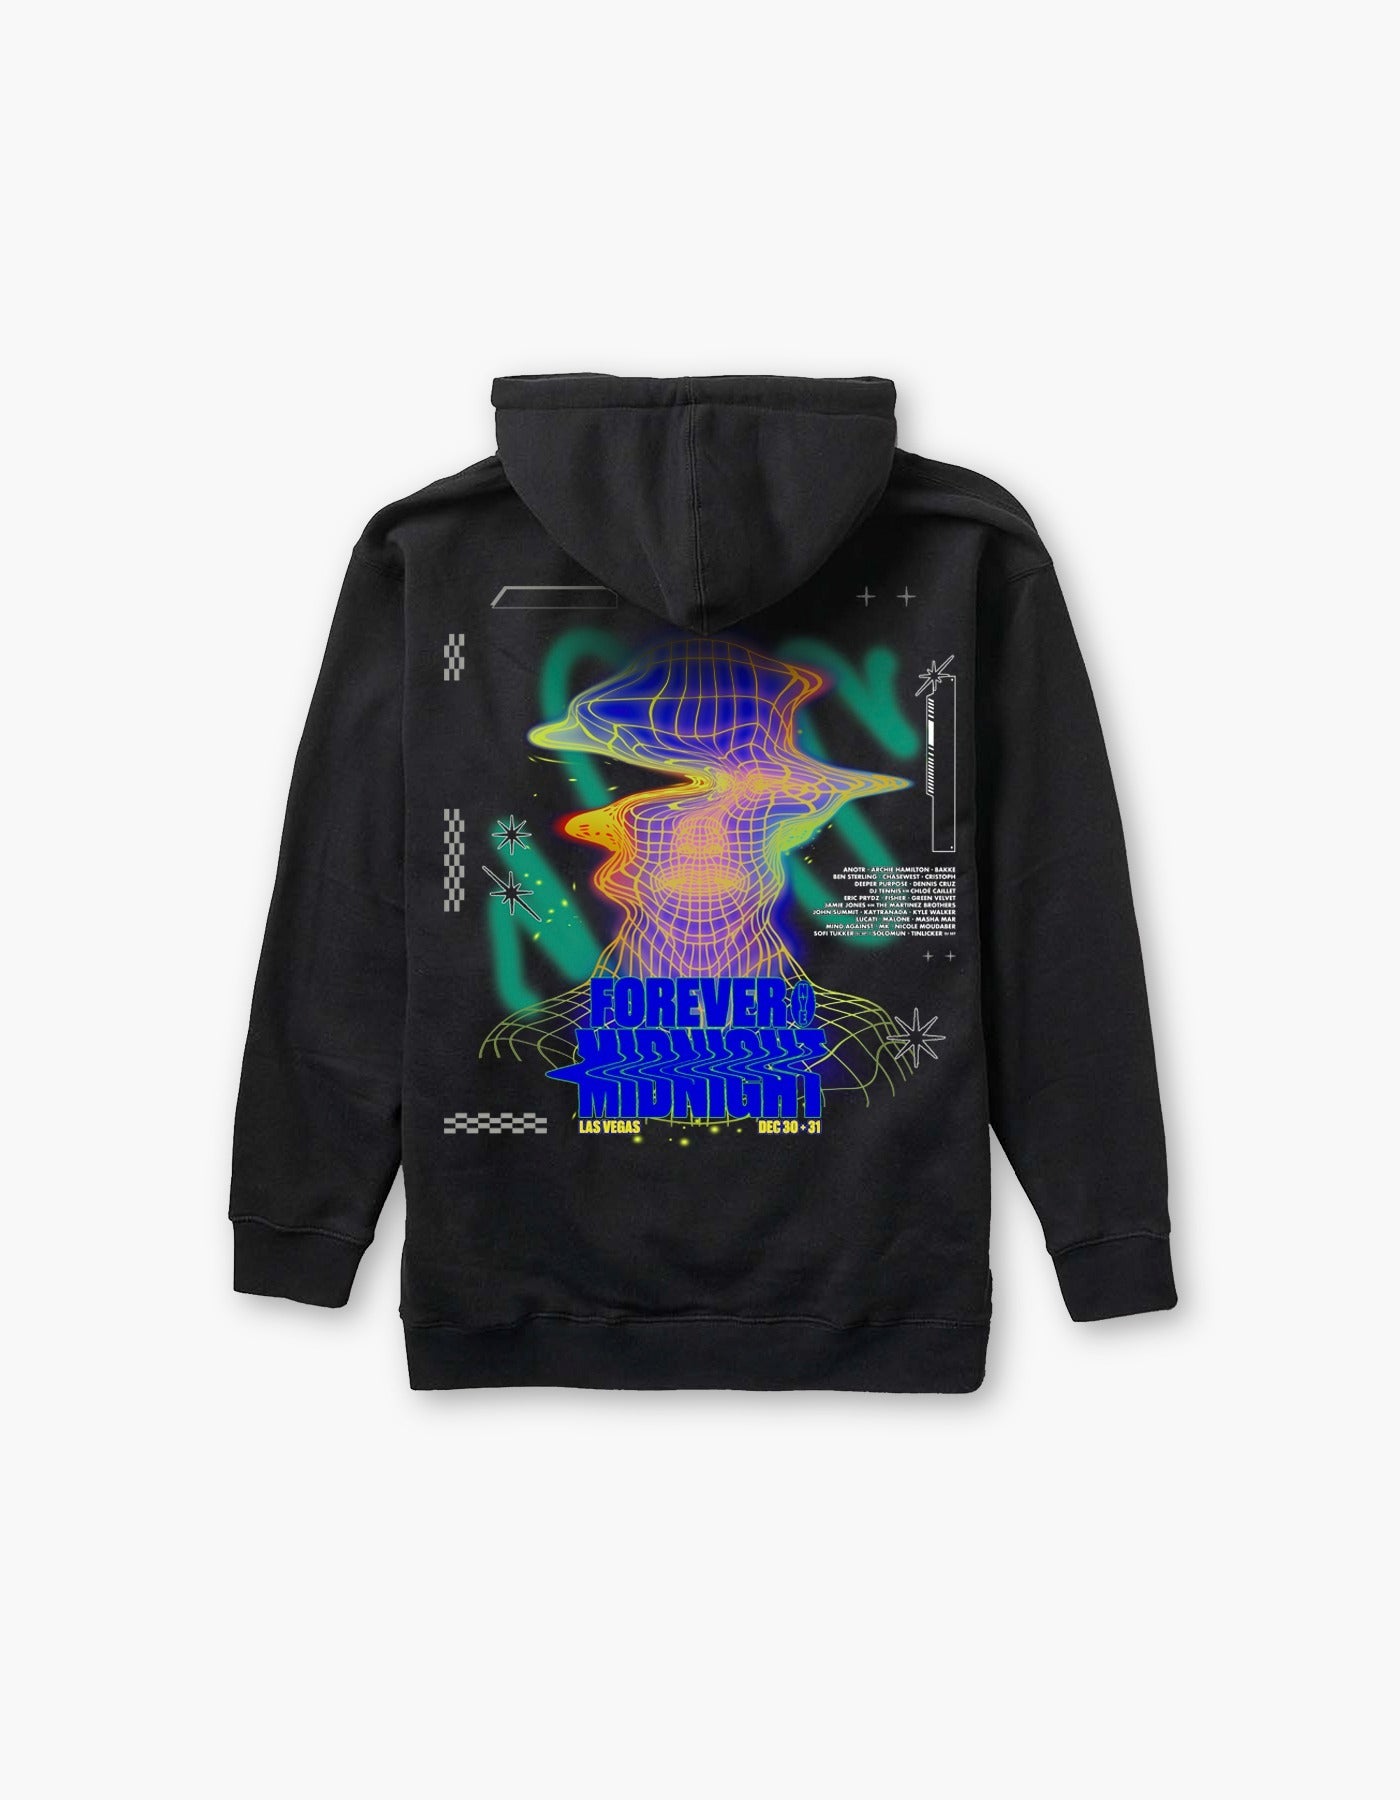 Forever Midnight LV Cyberspace Lineup Hoodie